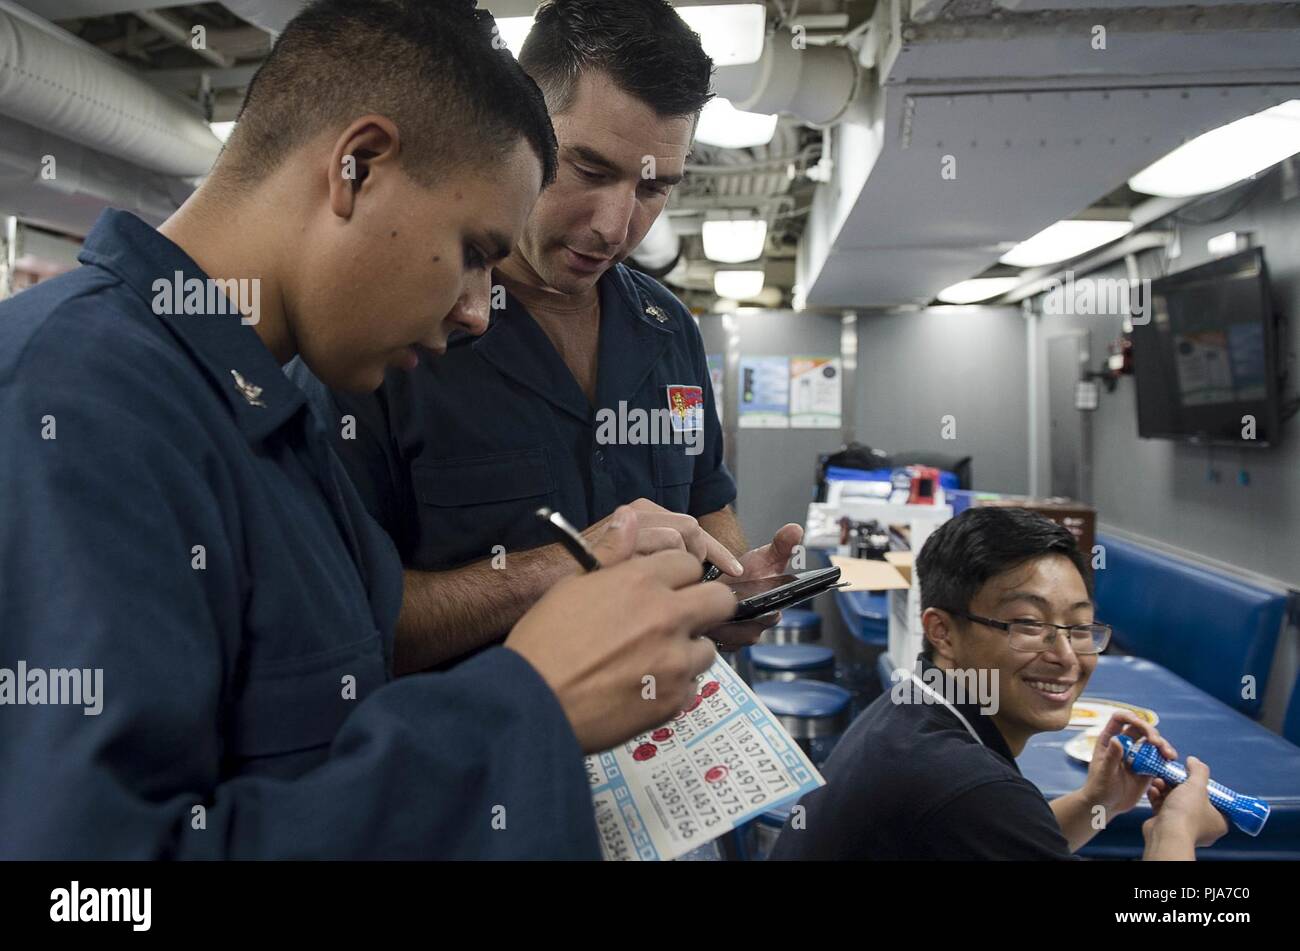 PHILIPPINE SEA (July 4, 2018) Fire Controlman (Aegis) 2nd Class Ismael Rodriguez, left, and Sonar Technican (Surface) 1st Class Timothy Baker check a bingo board during a Morale, Welfare and Recreation (MWR) event on the mess decks of the Arleigh Burke-class guided-missile destroyer USS Benfold (DDG 65). Benfold is forward-deployed to the U.S. 7th Fleet area of operations in support of security and stability in the Indo-Pacific region. Stock Photo